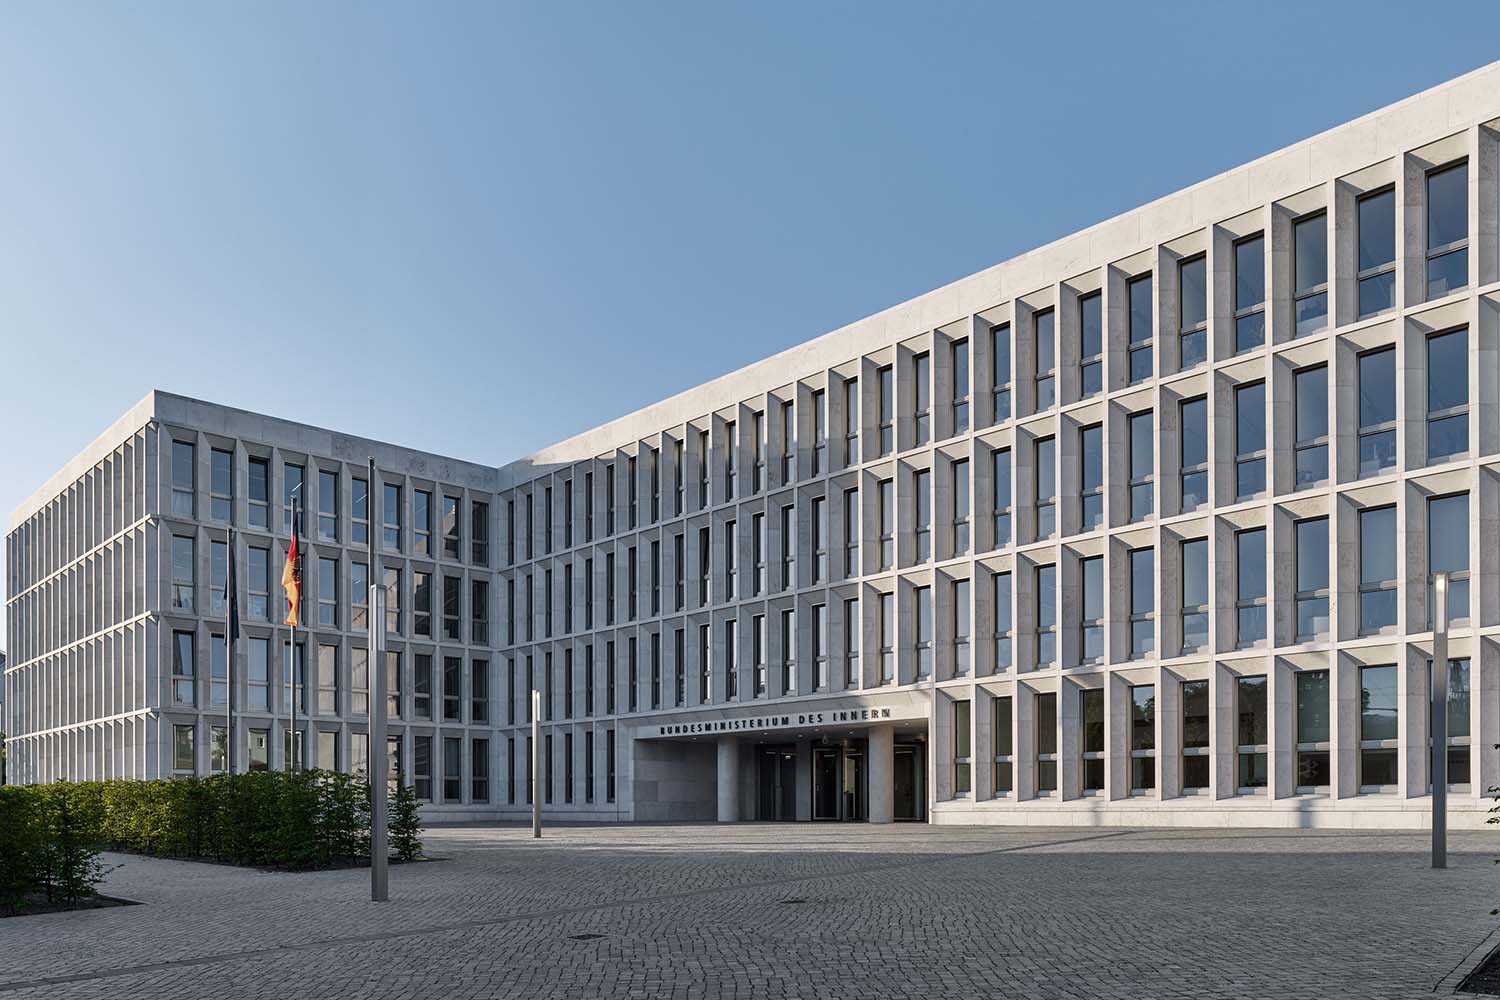 View of the main entrance of the new building of the Federal Ministry at Moabiter Werder.